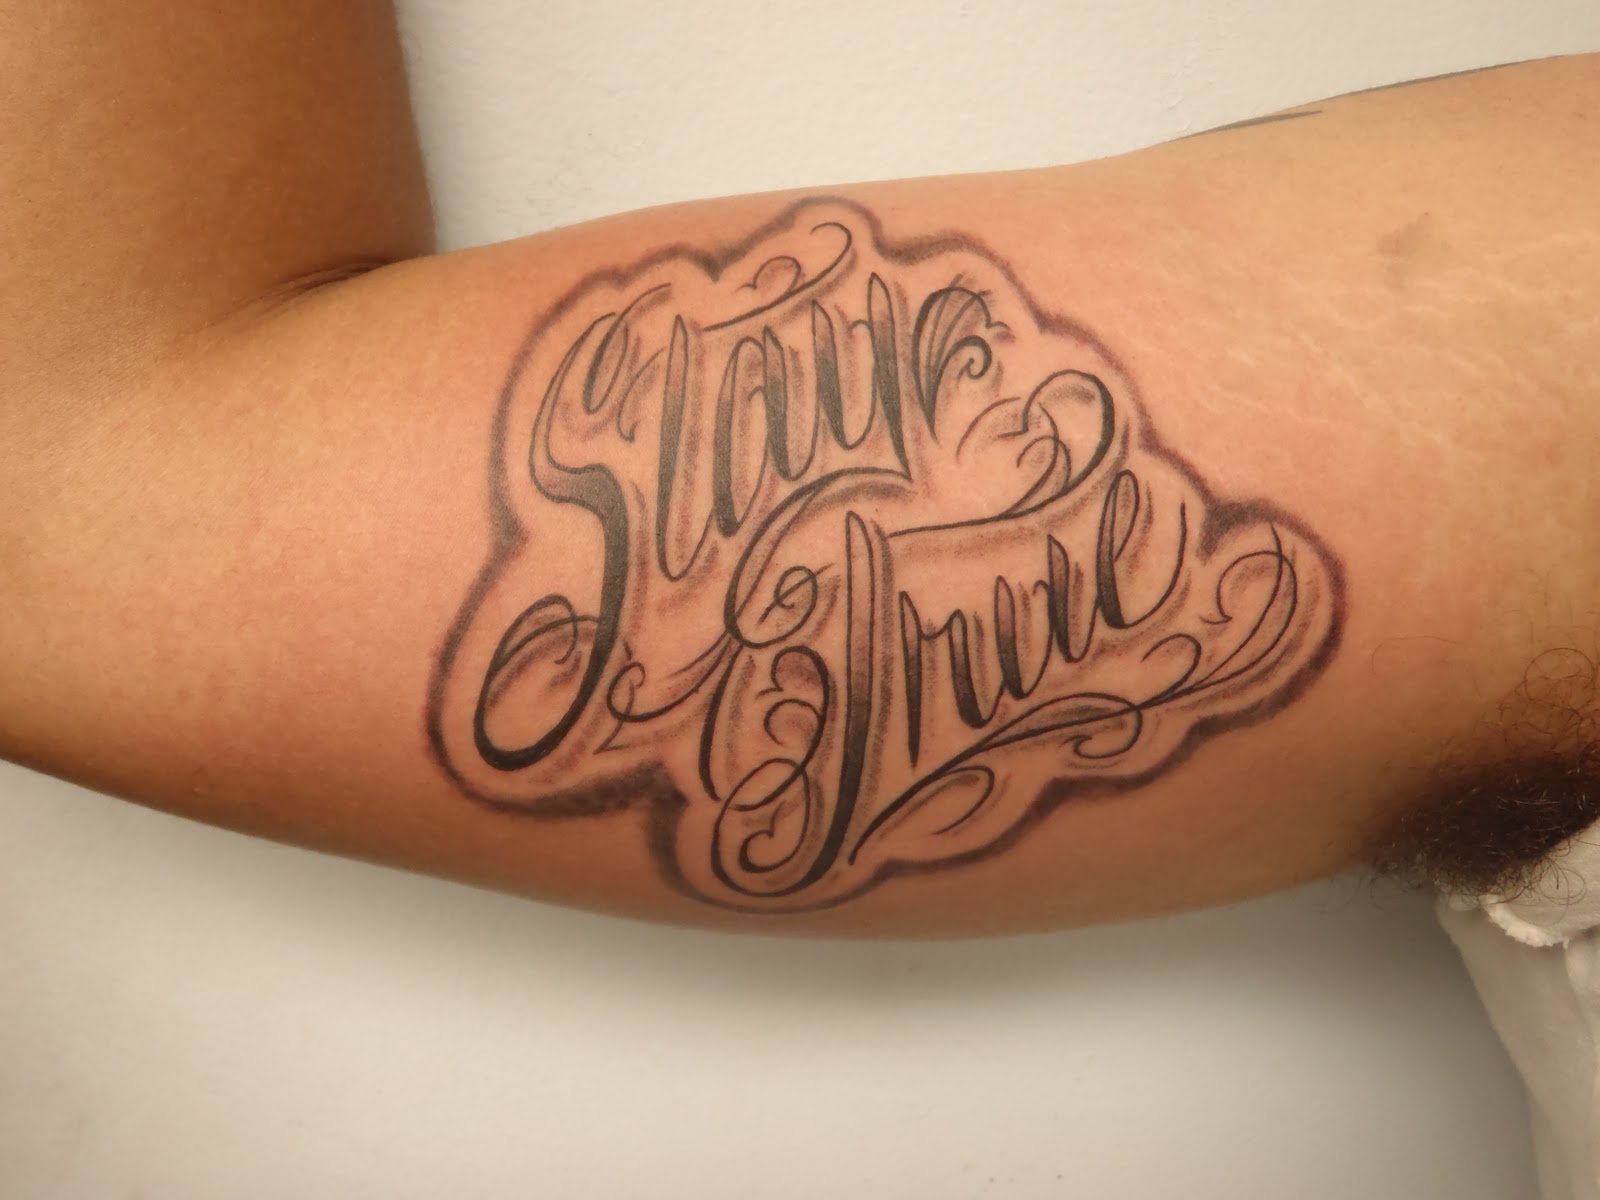 Shaded Letters Tattoo Ideas - wide 1